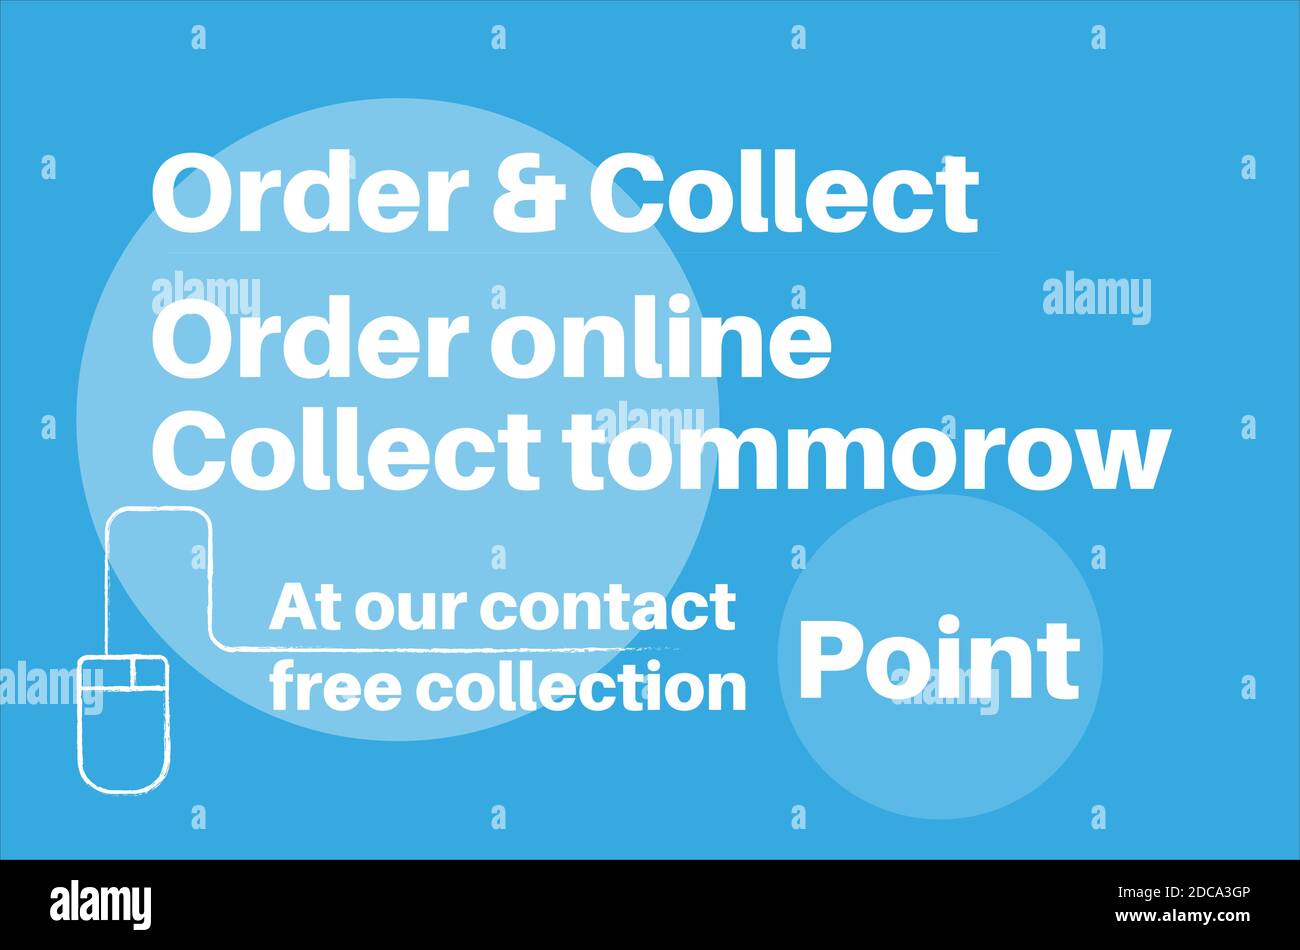 Order and collect contact free collection point vector illustration on a blue background. Stock Vector